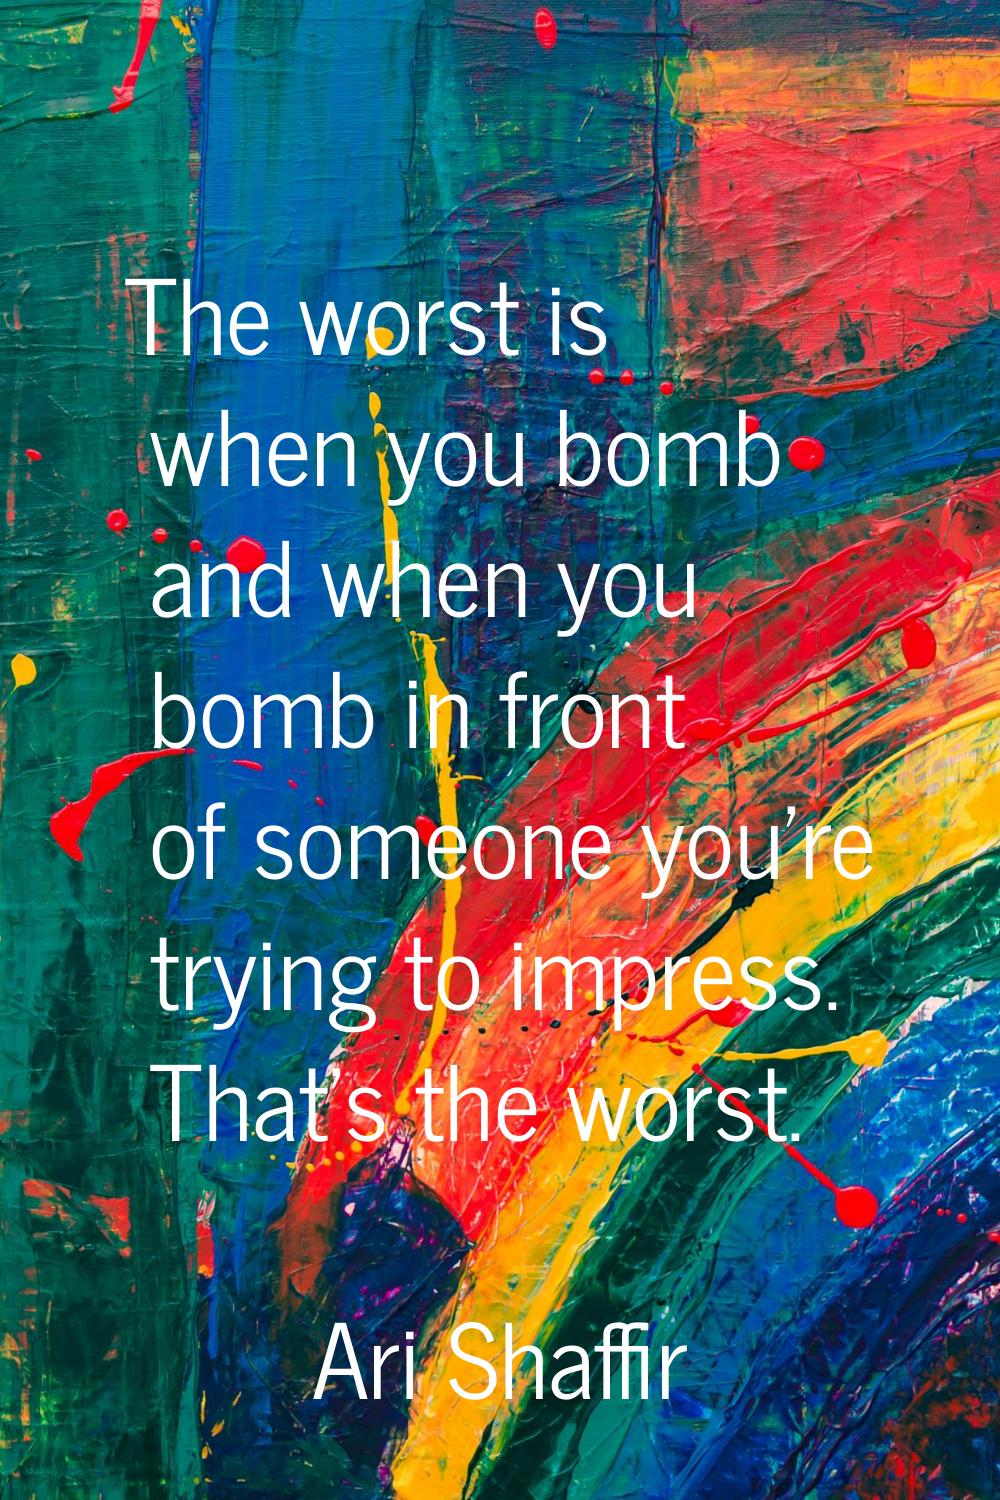 The worst is when you bomb and when you bomb in front of someone you're trying to impress. That's t